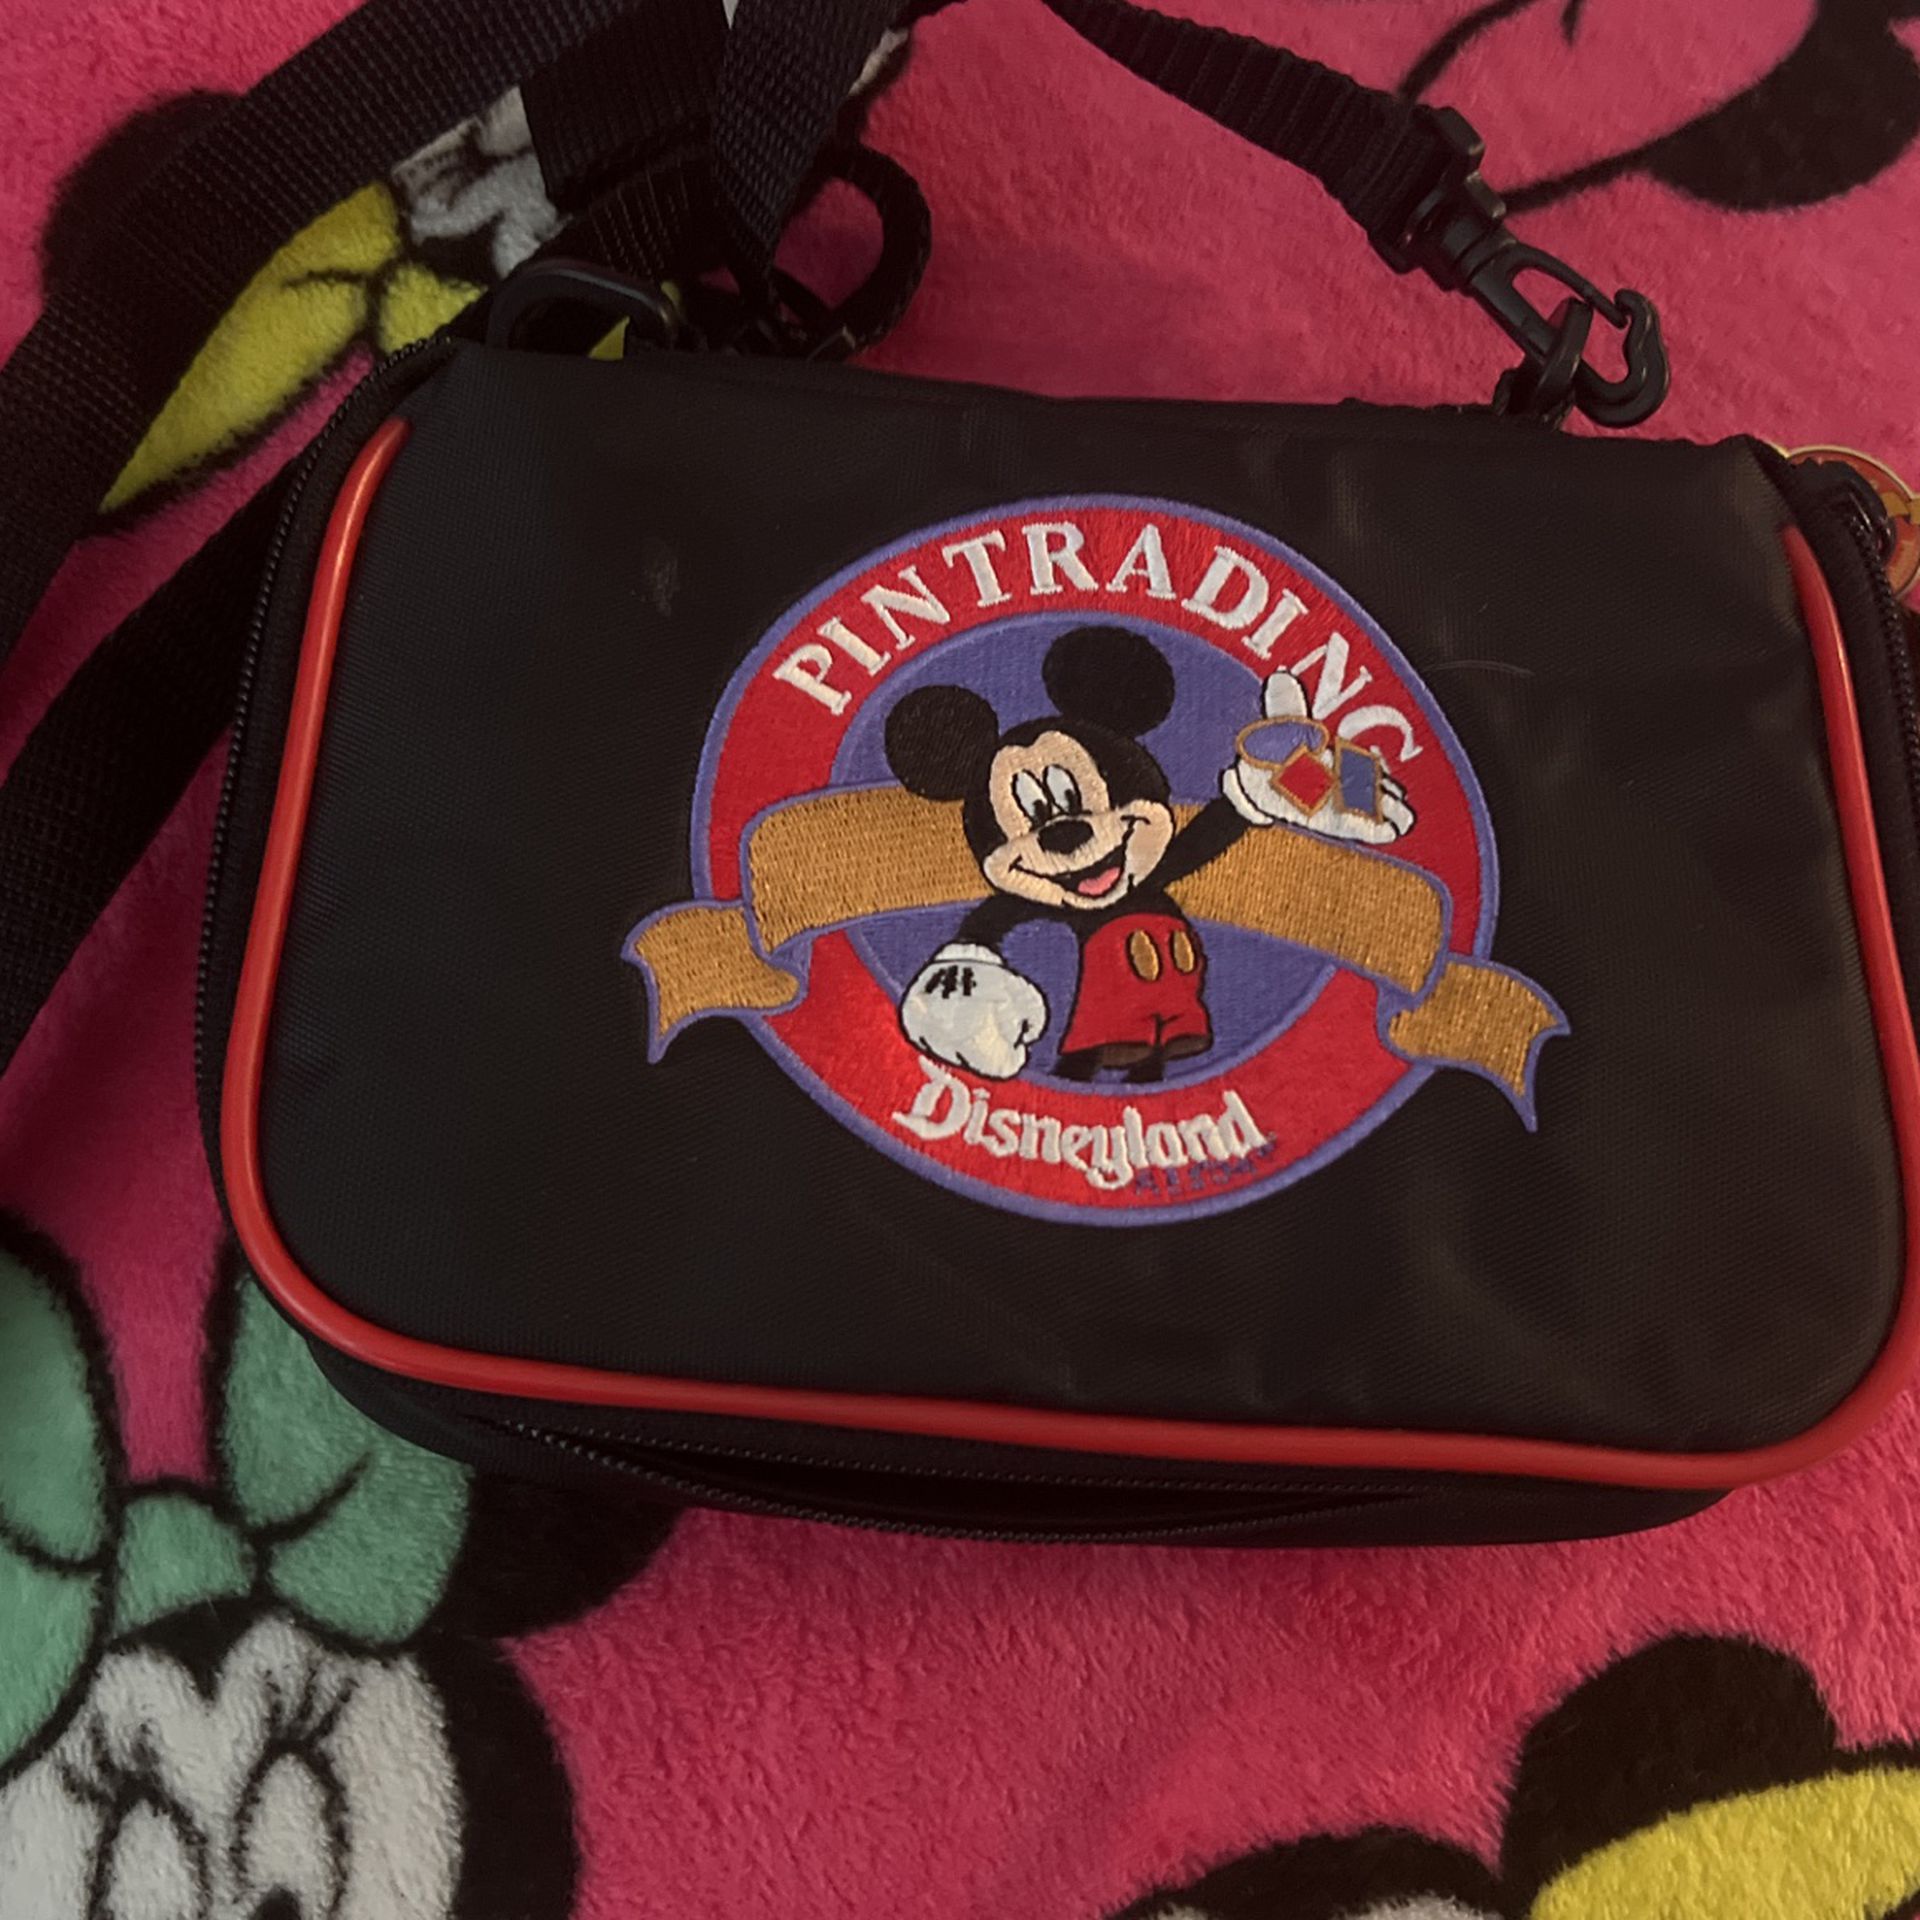 Walt Disney World 2016 Pin Trading Book Bag Small Sorcerer Mickey Mouse WDW  EUC for Sale in Las Vegas, NV - OfferUp